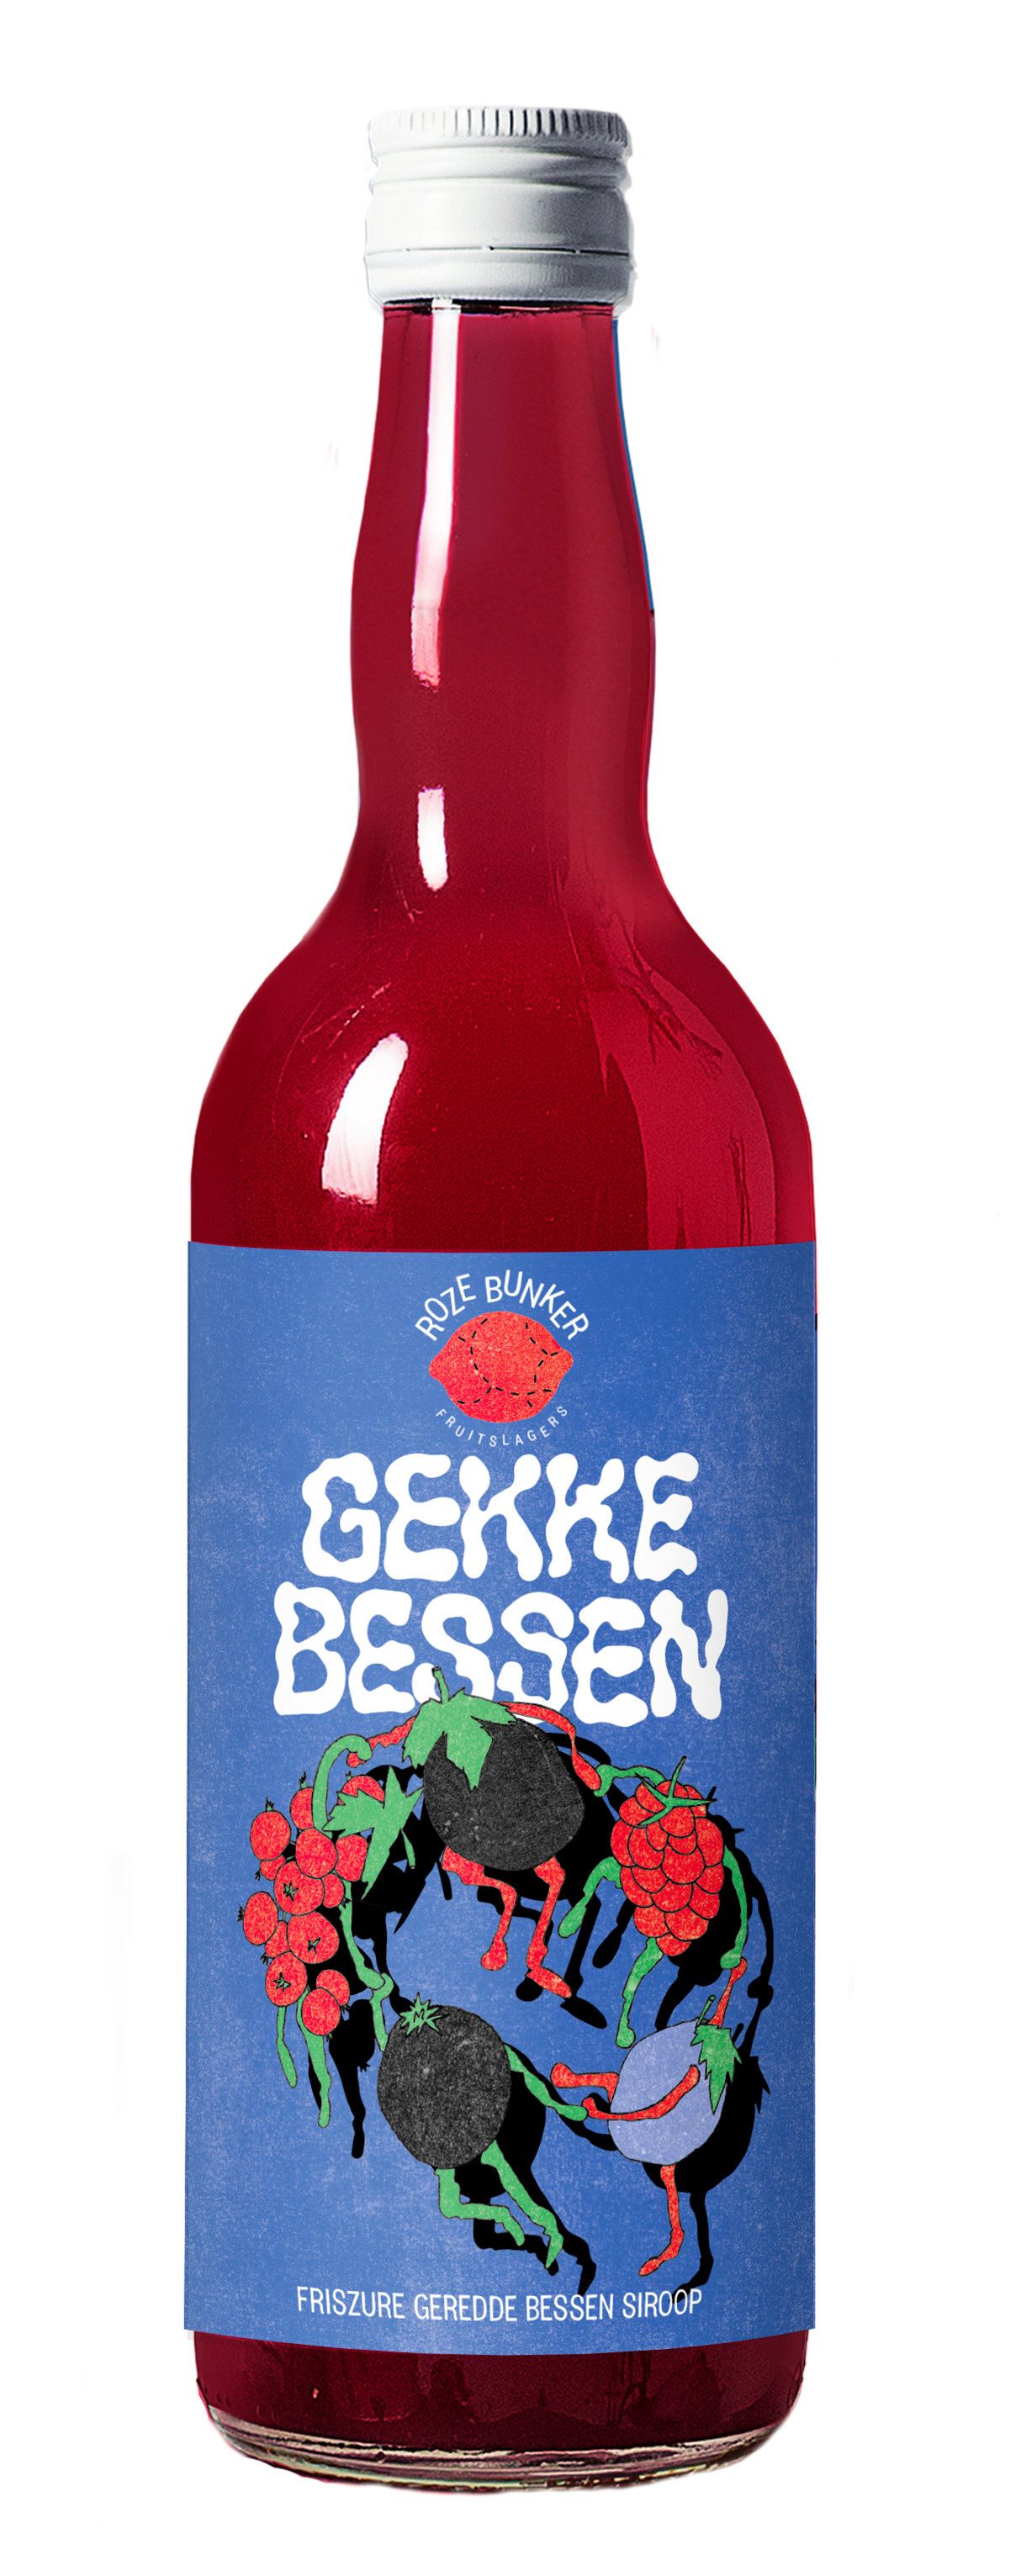 Bottle of Crazy Berry syrup by Roze Bunker